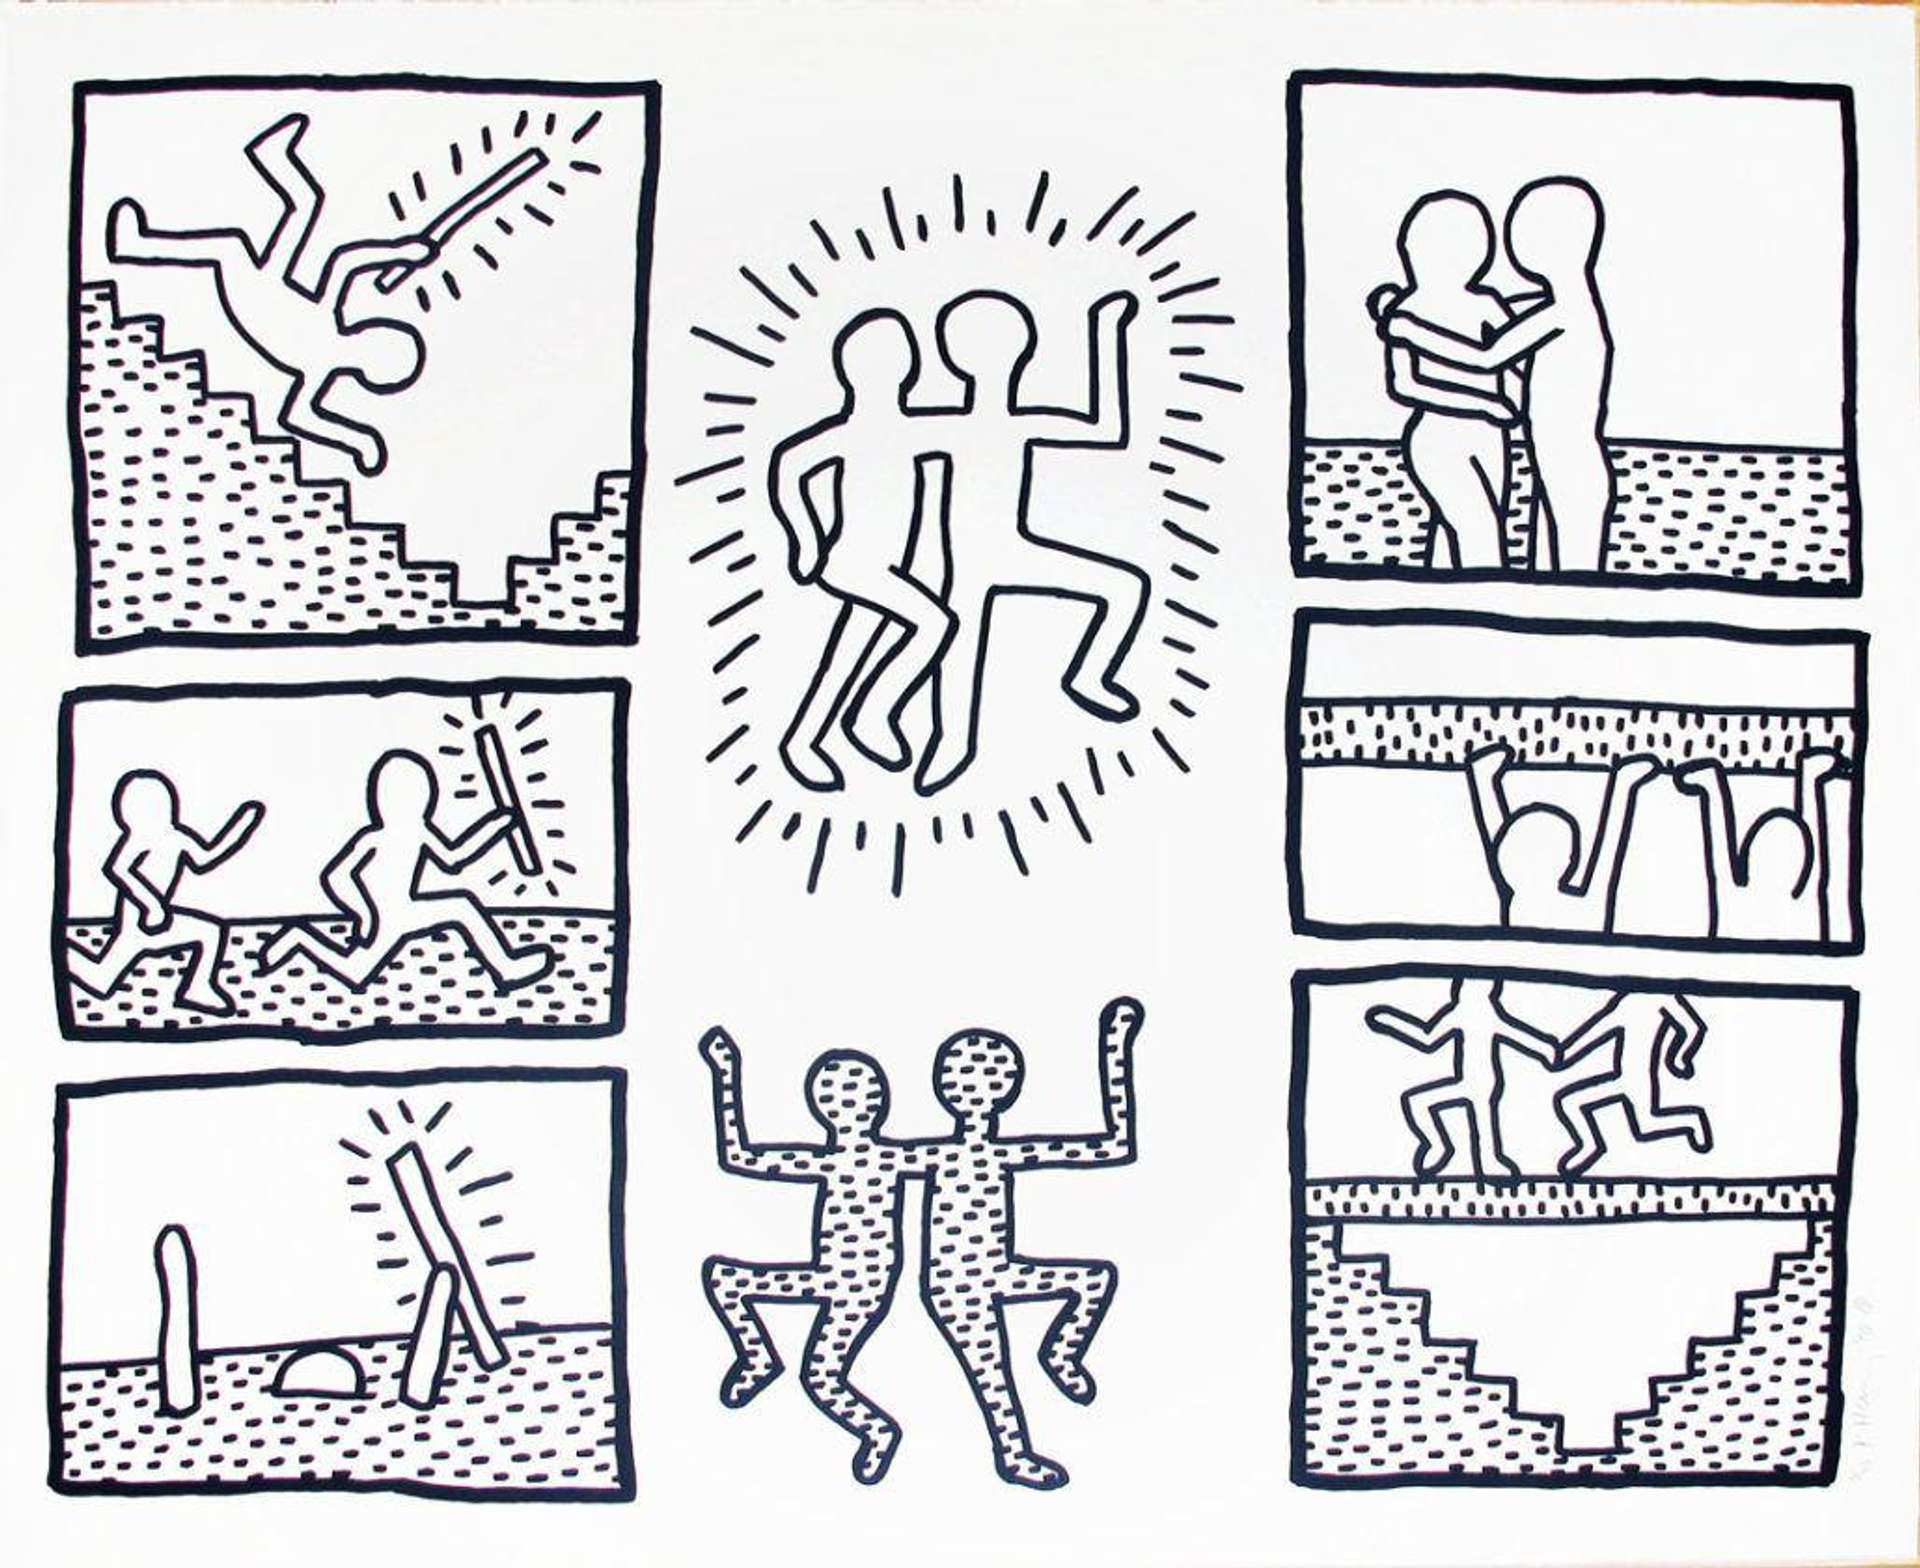 The Blueprint Drawings 6 - Signed Print by Keith Haring 1990 - MyArtBroker